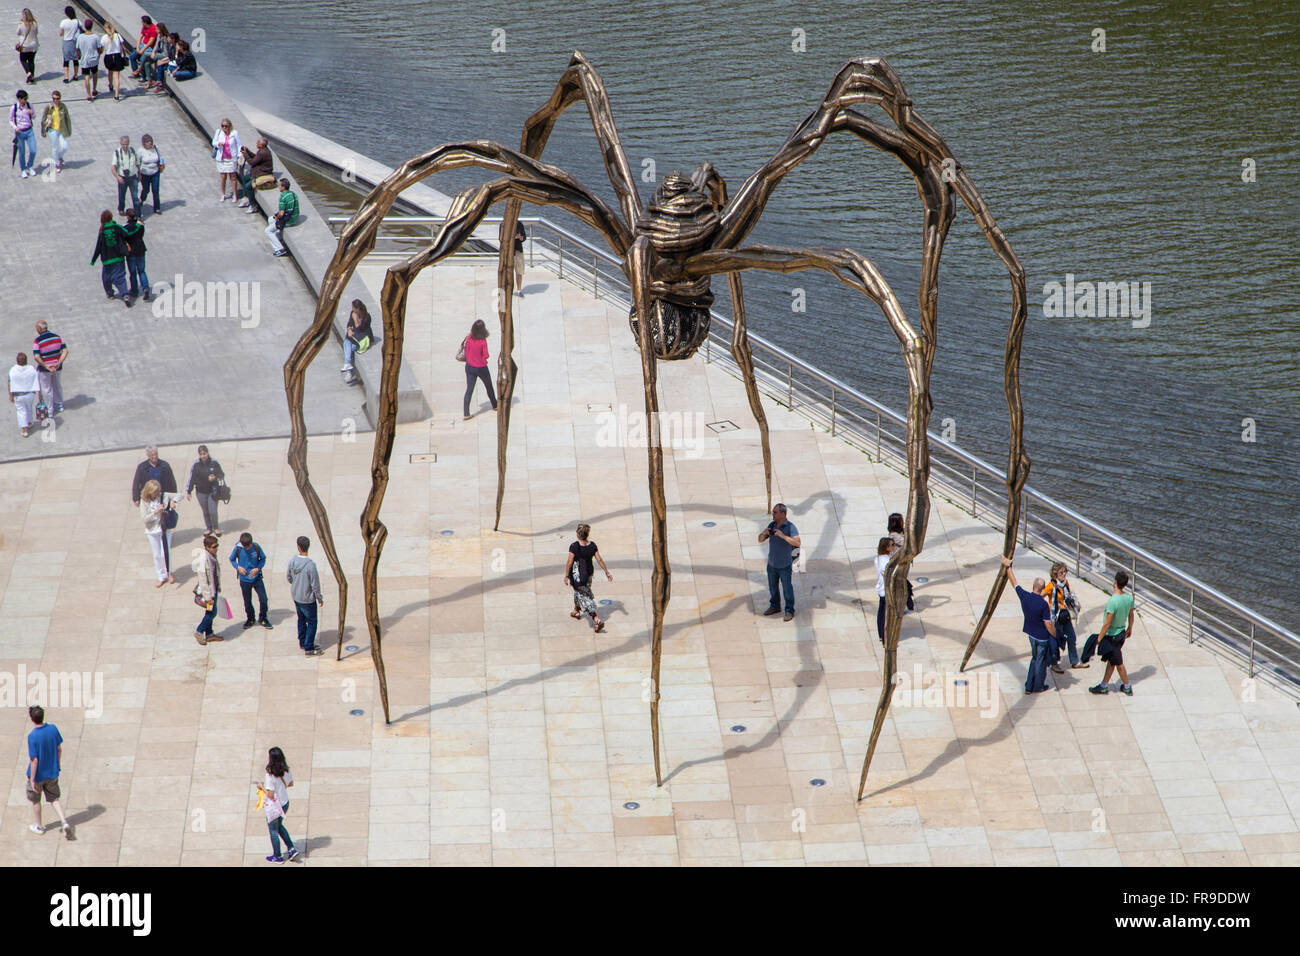 Spider sculpture, created by Louise Bourgeois in 1999, between the Guggenheim museum and the Nervion river, Bilbao, Spain. Stock Photo